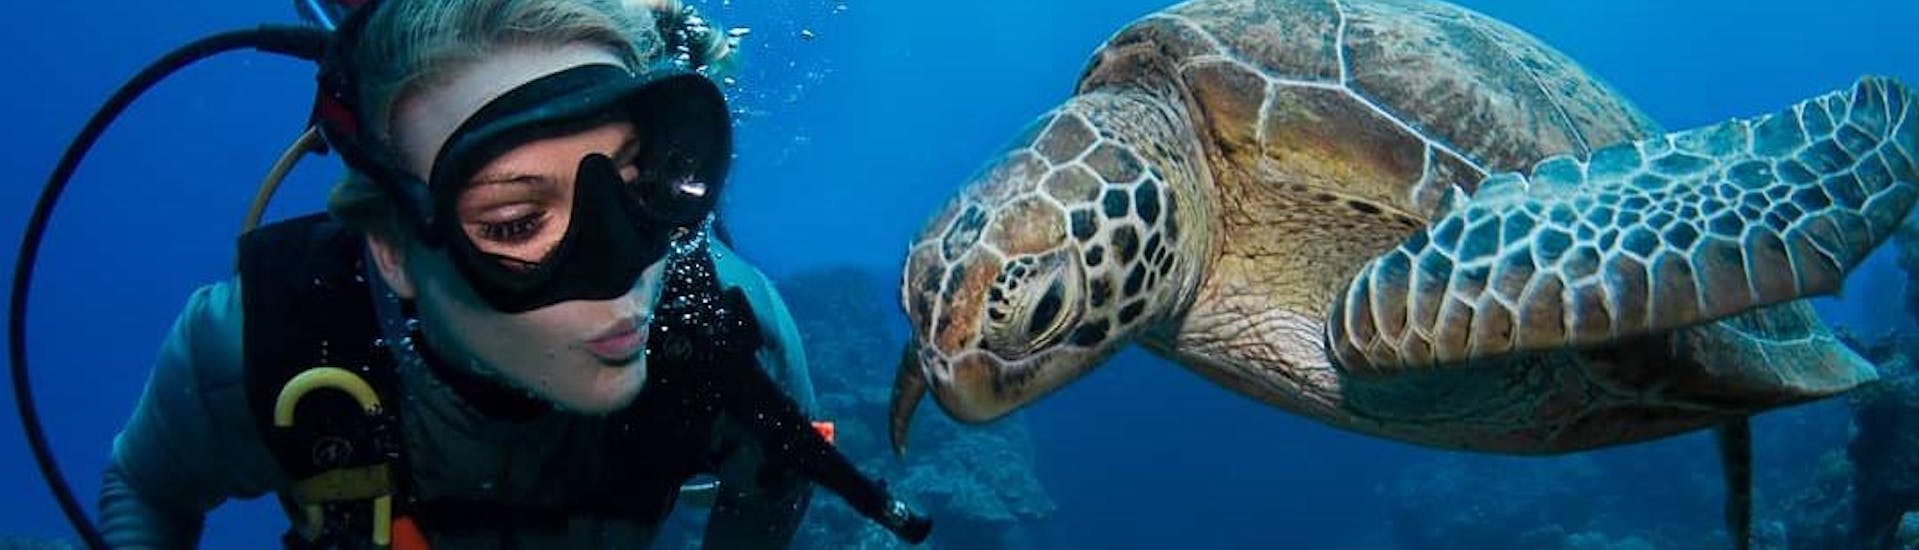 During the Discover Scuba Diving on the Great Barrier Reef for Beginner organised by Passions of Paradise, a woman is enjoying the attention of a sea turtle.